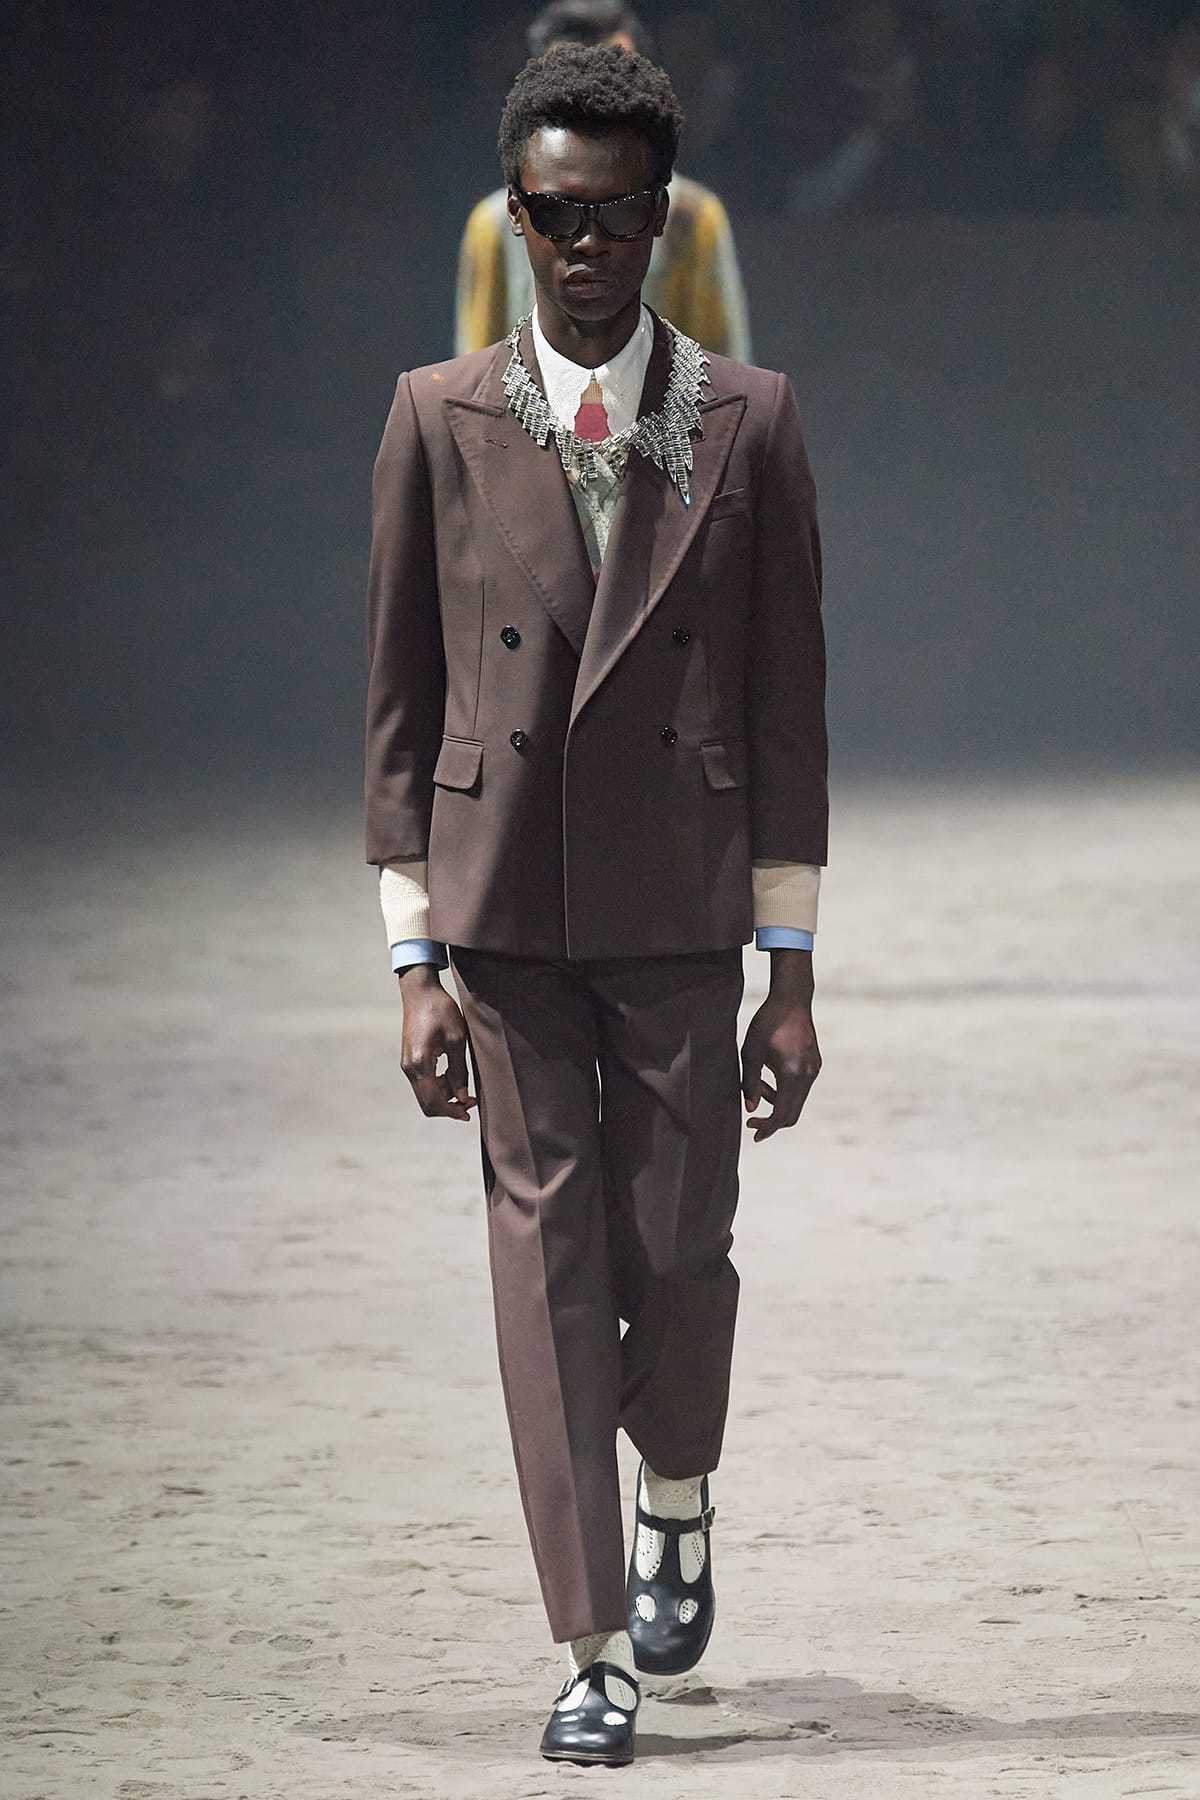 Every Look From Gucci's FW20 Men's 